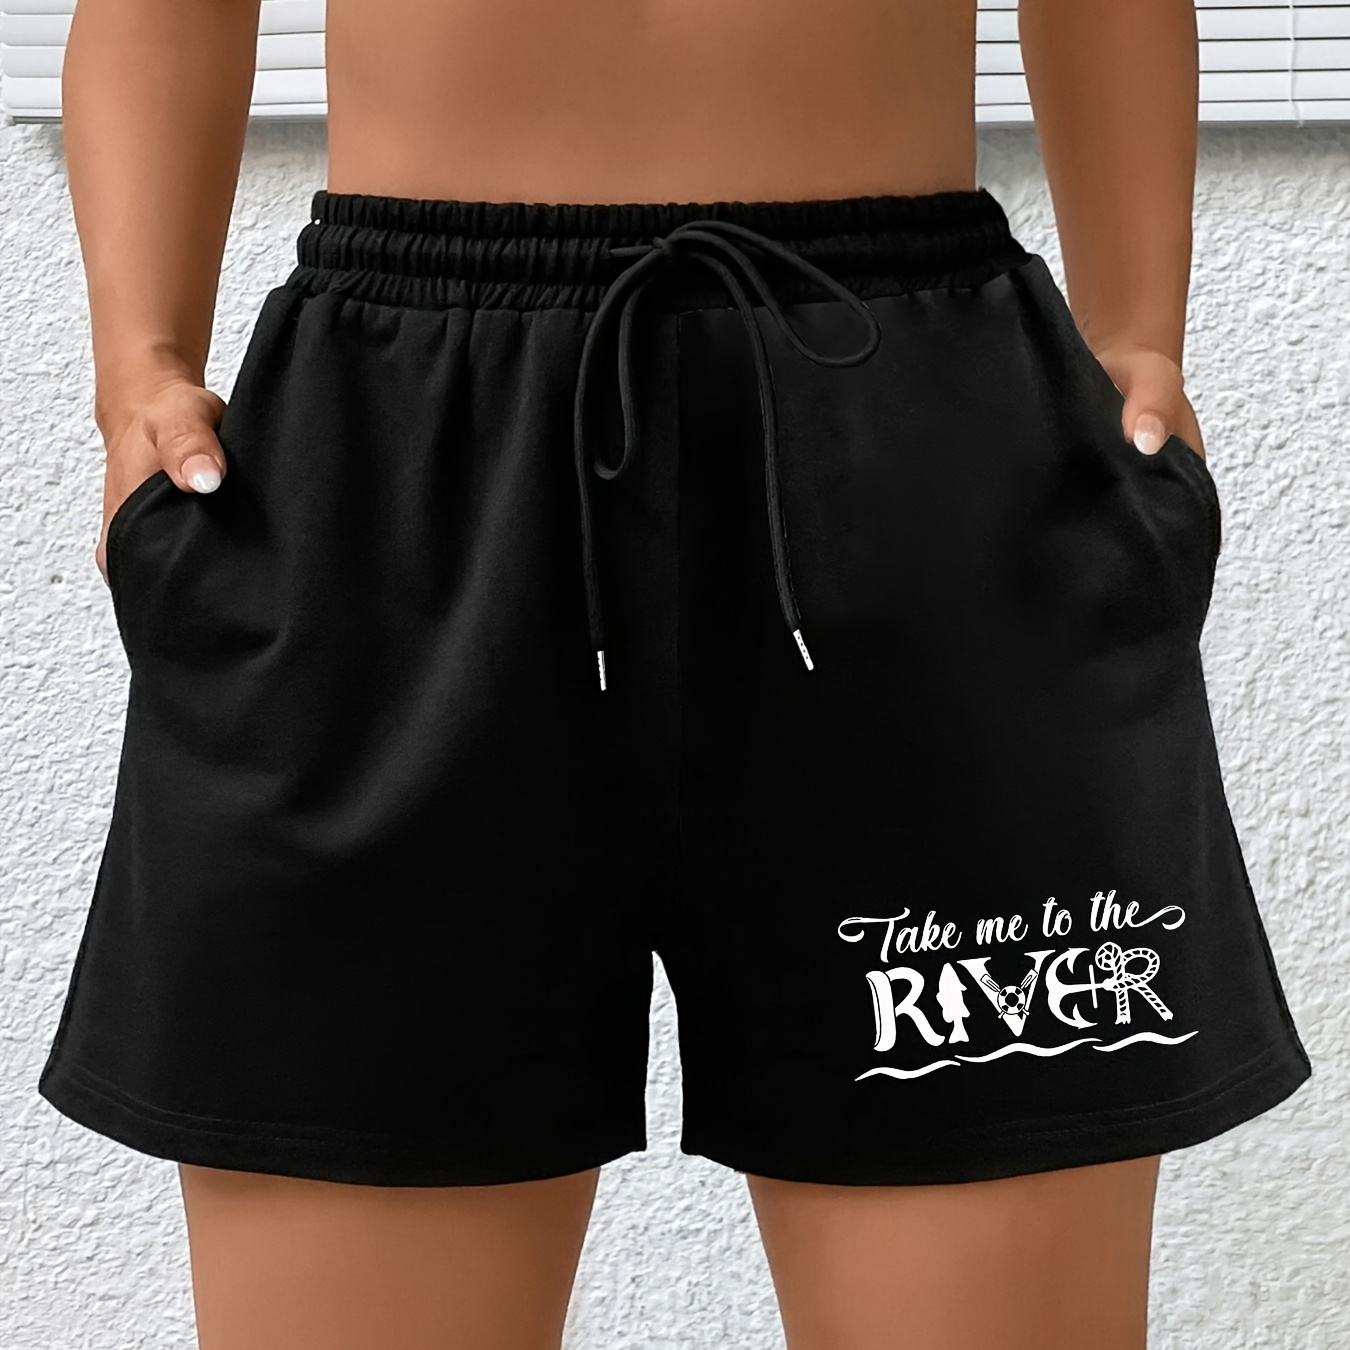 

Women's Plus Sports Shorts, Plus Size Take Me To The River Print Elastic Drawstring High Rise Shorts With Pockets